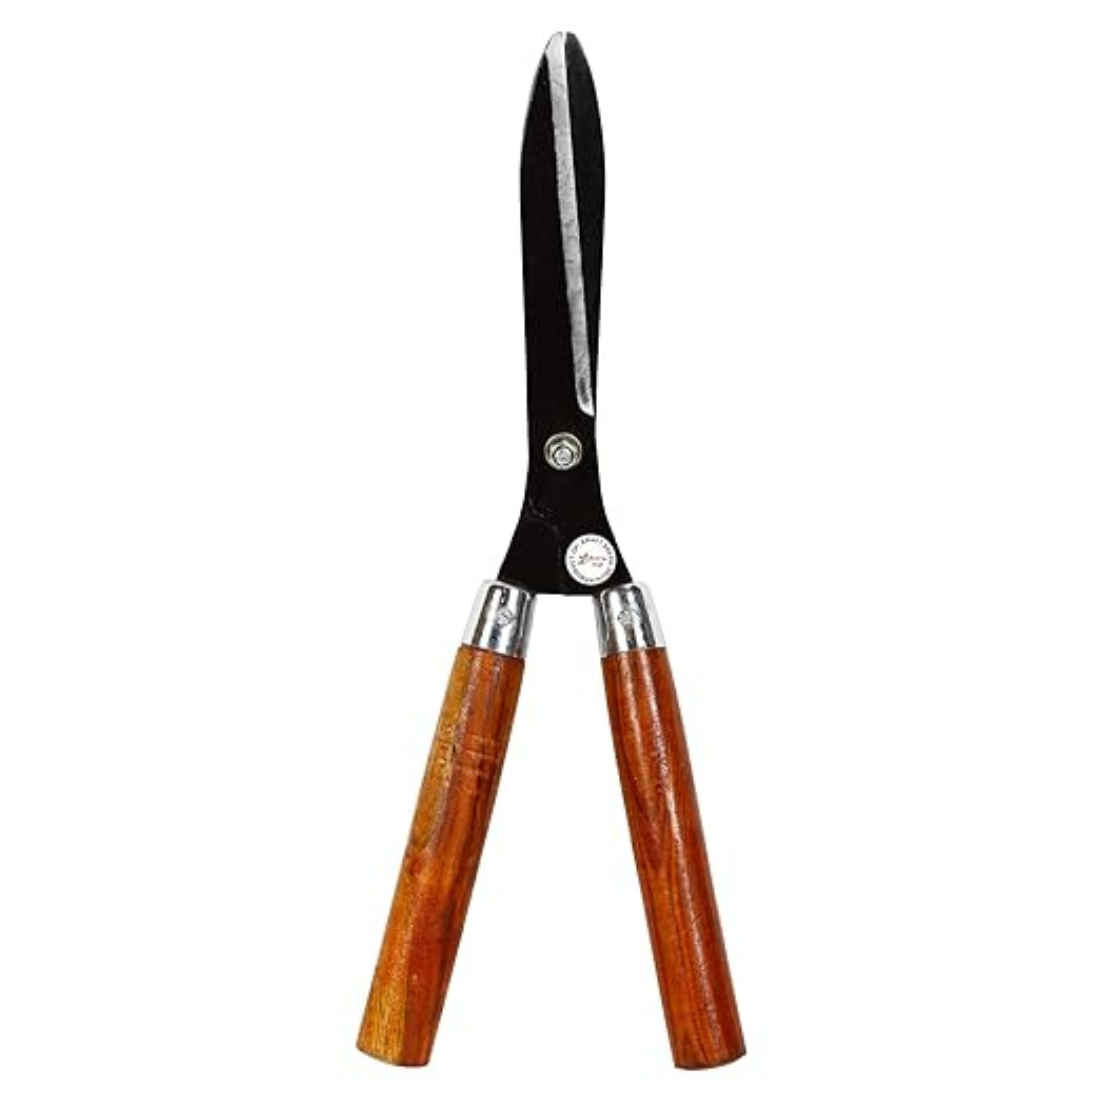 Buy Online: Hedge Shear Leo with Wooden Handle - Precision and durability for your garden maintenance needs, Order Hedge Shear Leo Online: Invest in quality with this robust tool featuring a wooden handle, Buy Online: Hedge Shear Leo - Wooden Handle for effortless and effective hedge trimming